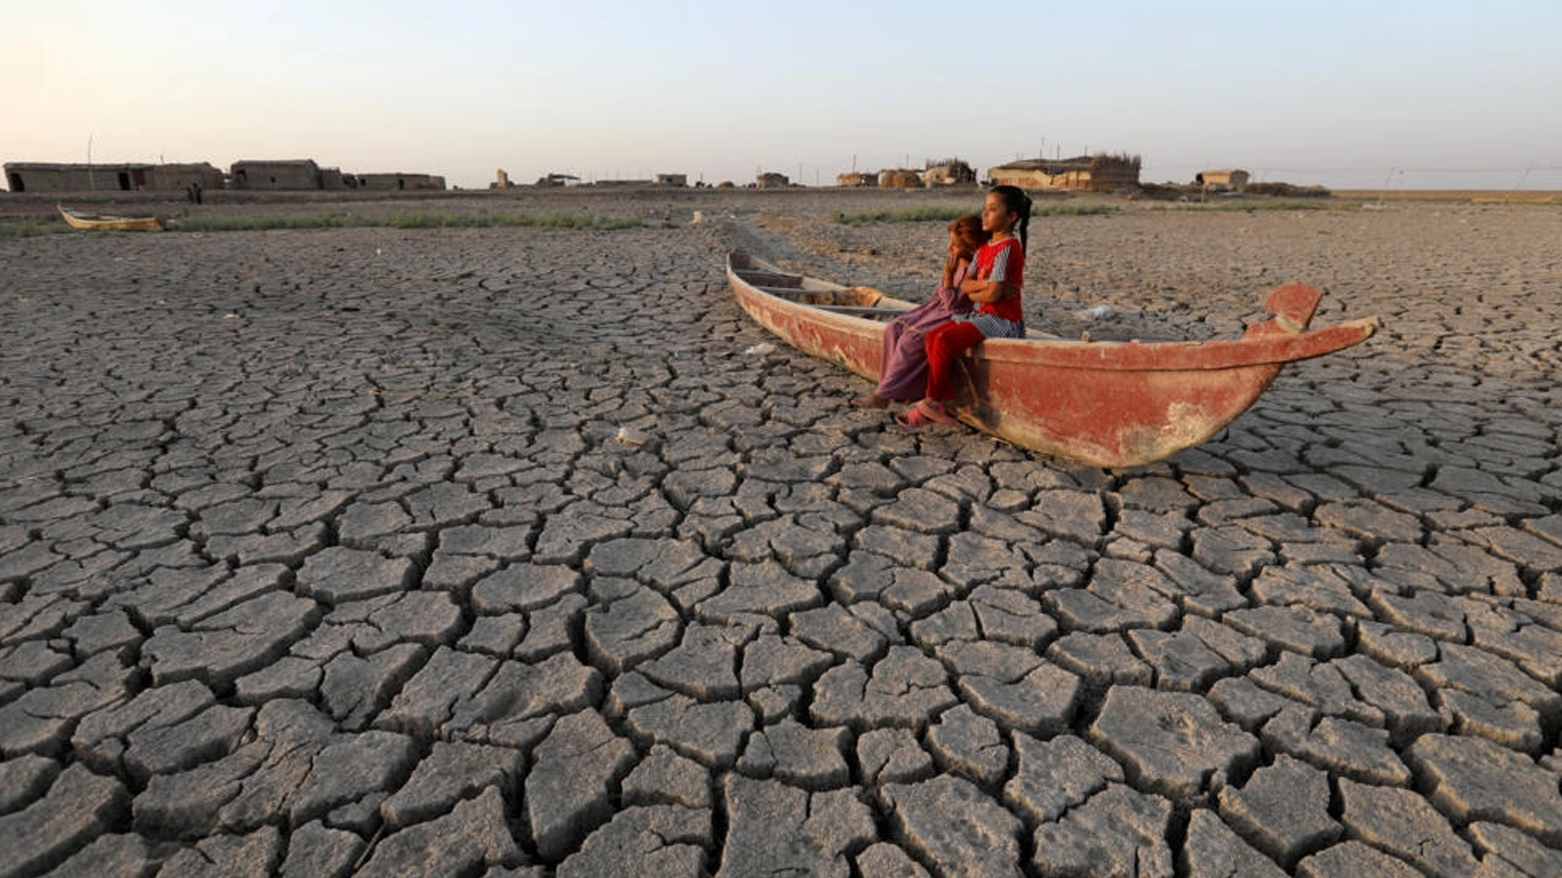 Desertification forces displacement in Iraq amid severe climate change impact